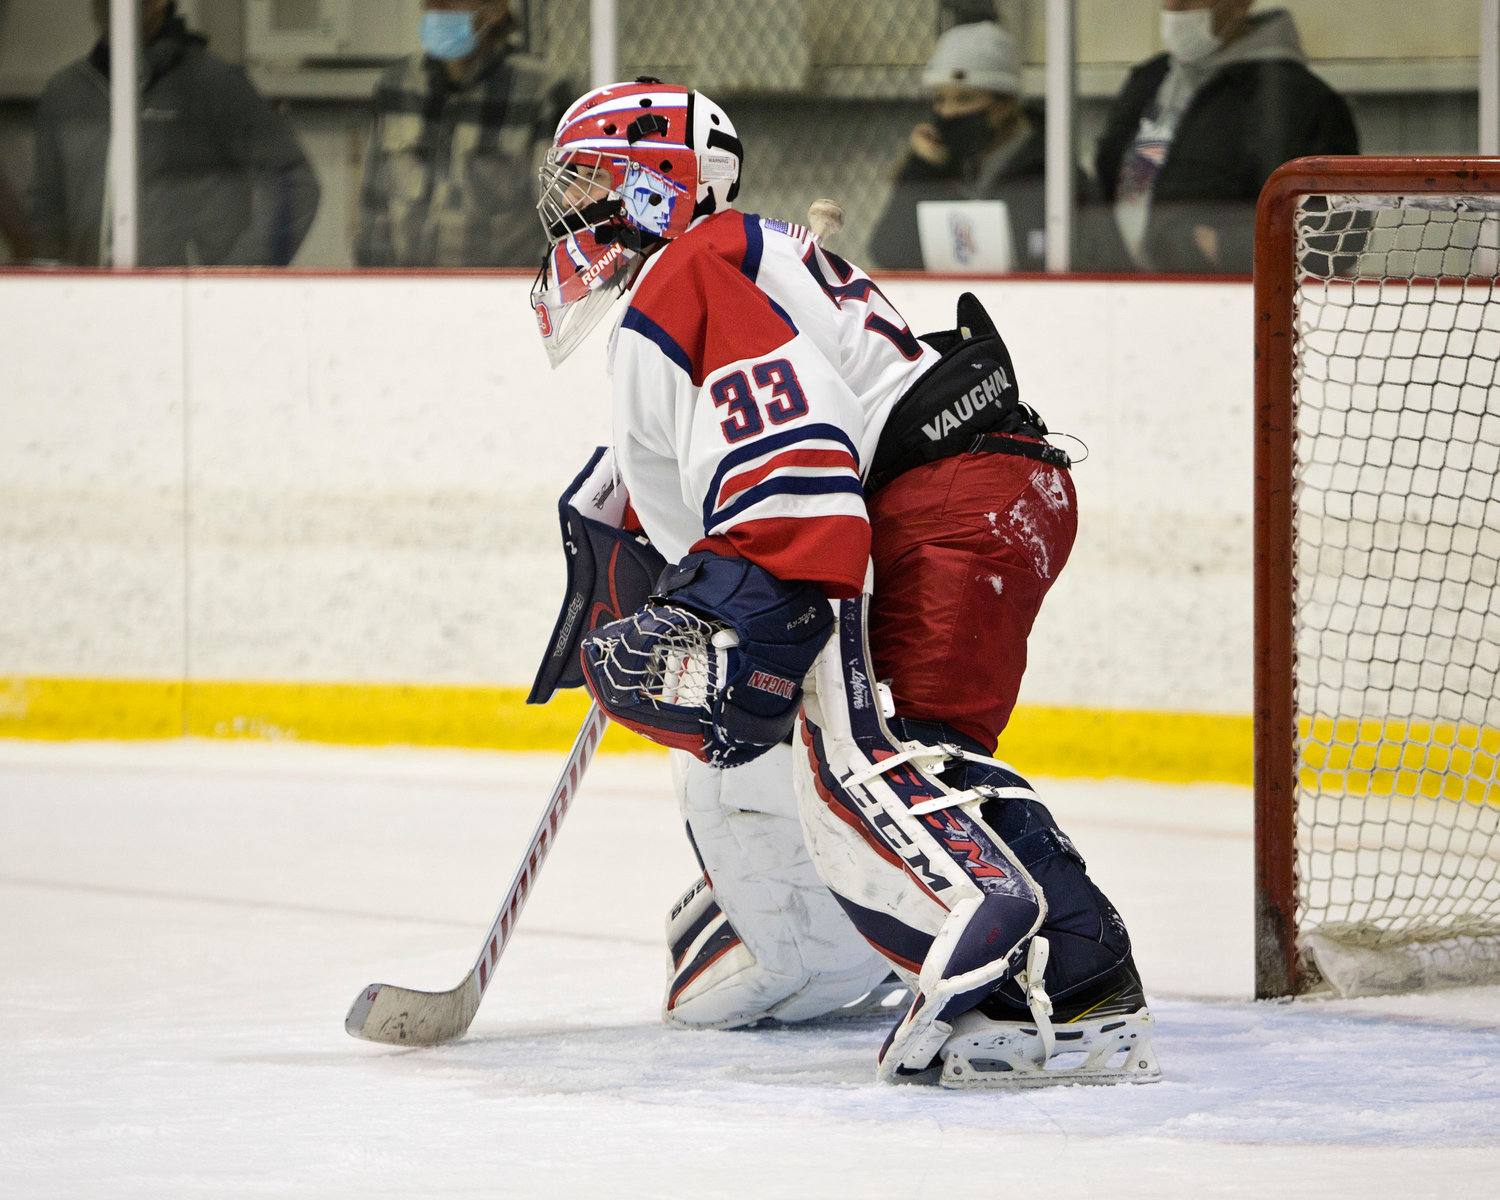 Stephen Dutra stands ready in goal during Sunday's Injury Fund game.